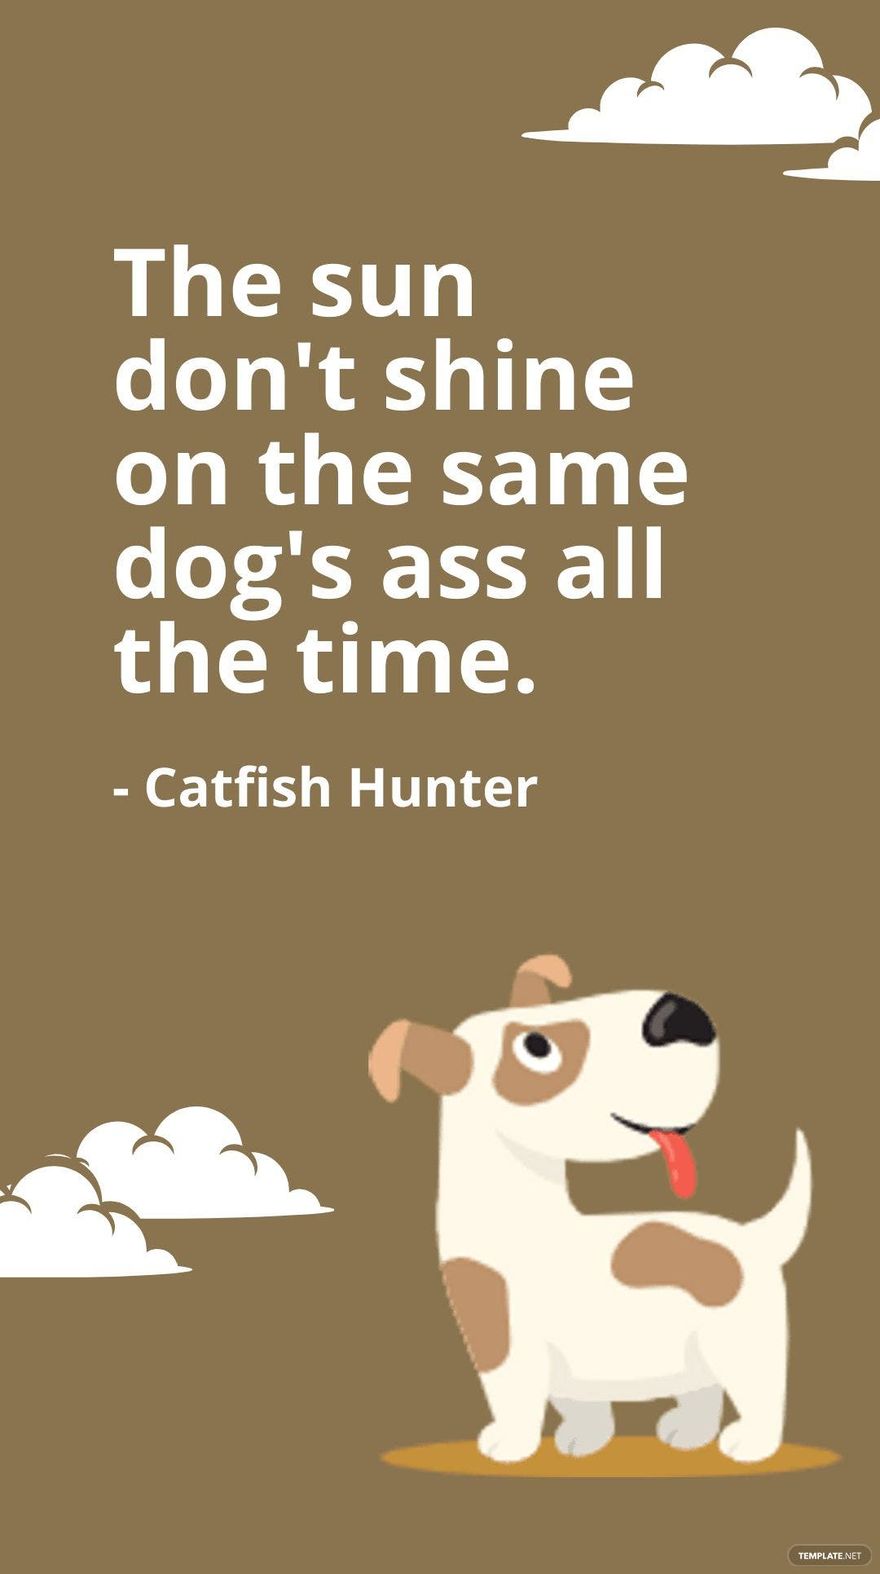 Free Catfish Hunter - The sun don't shine on the same dog's ass all the time. in JPG